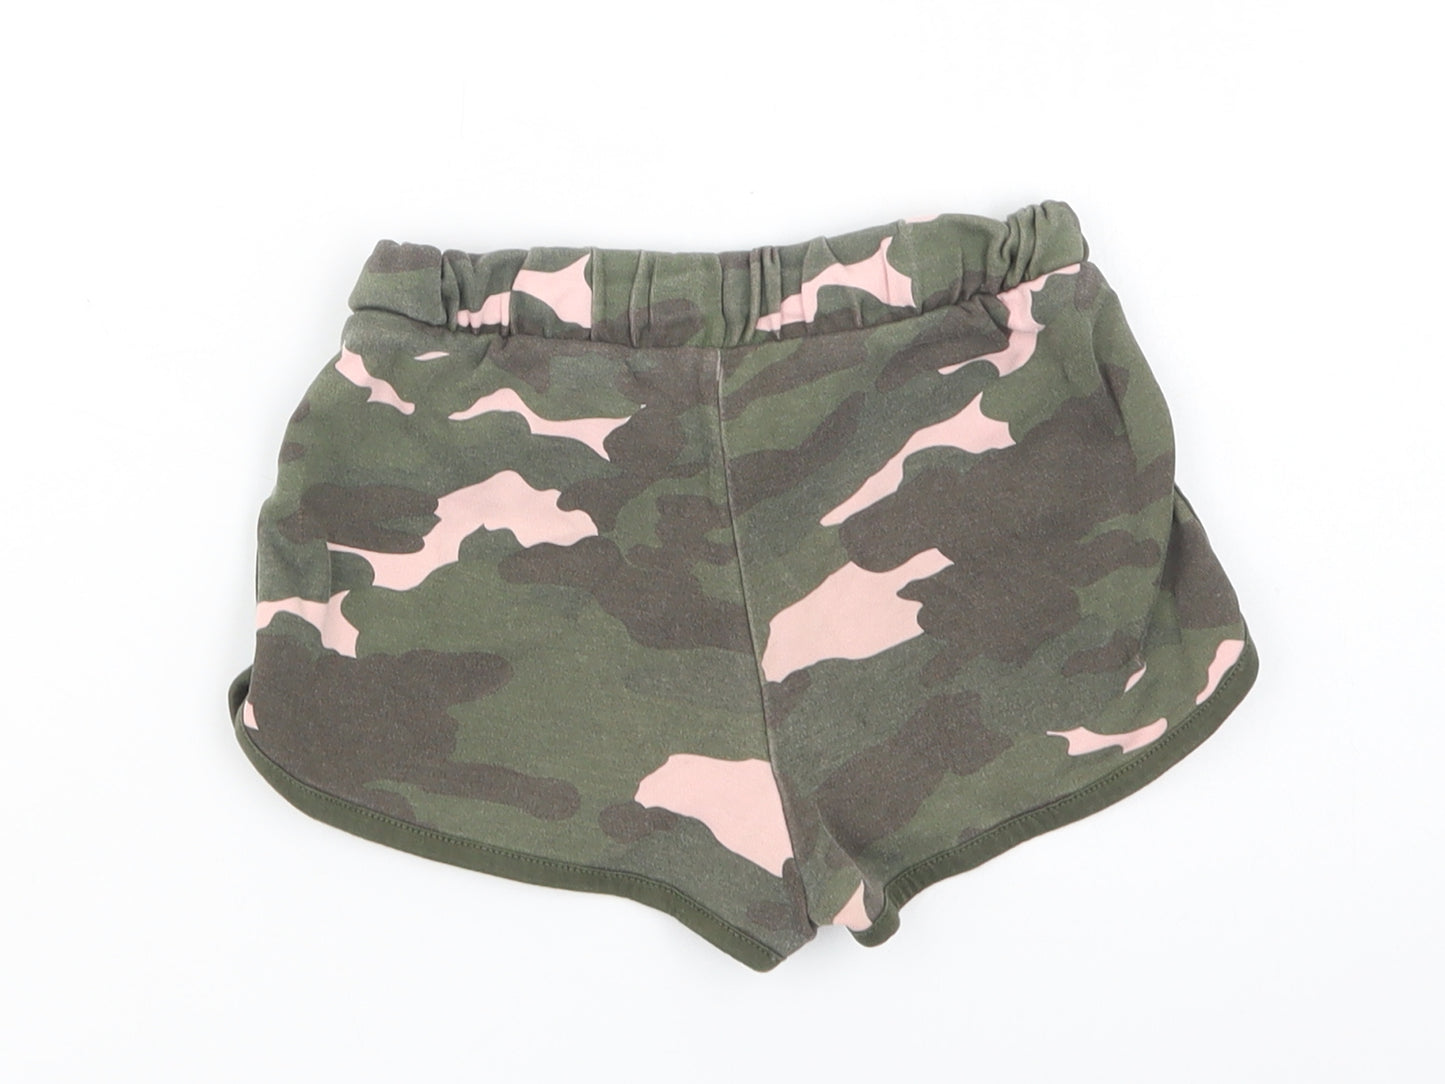 Marks and Spencer Girls Green Camouflage Cotton Sweat Shorts Size 6-7 Years  Regular Drawstring